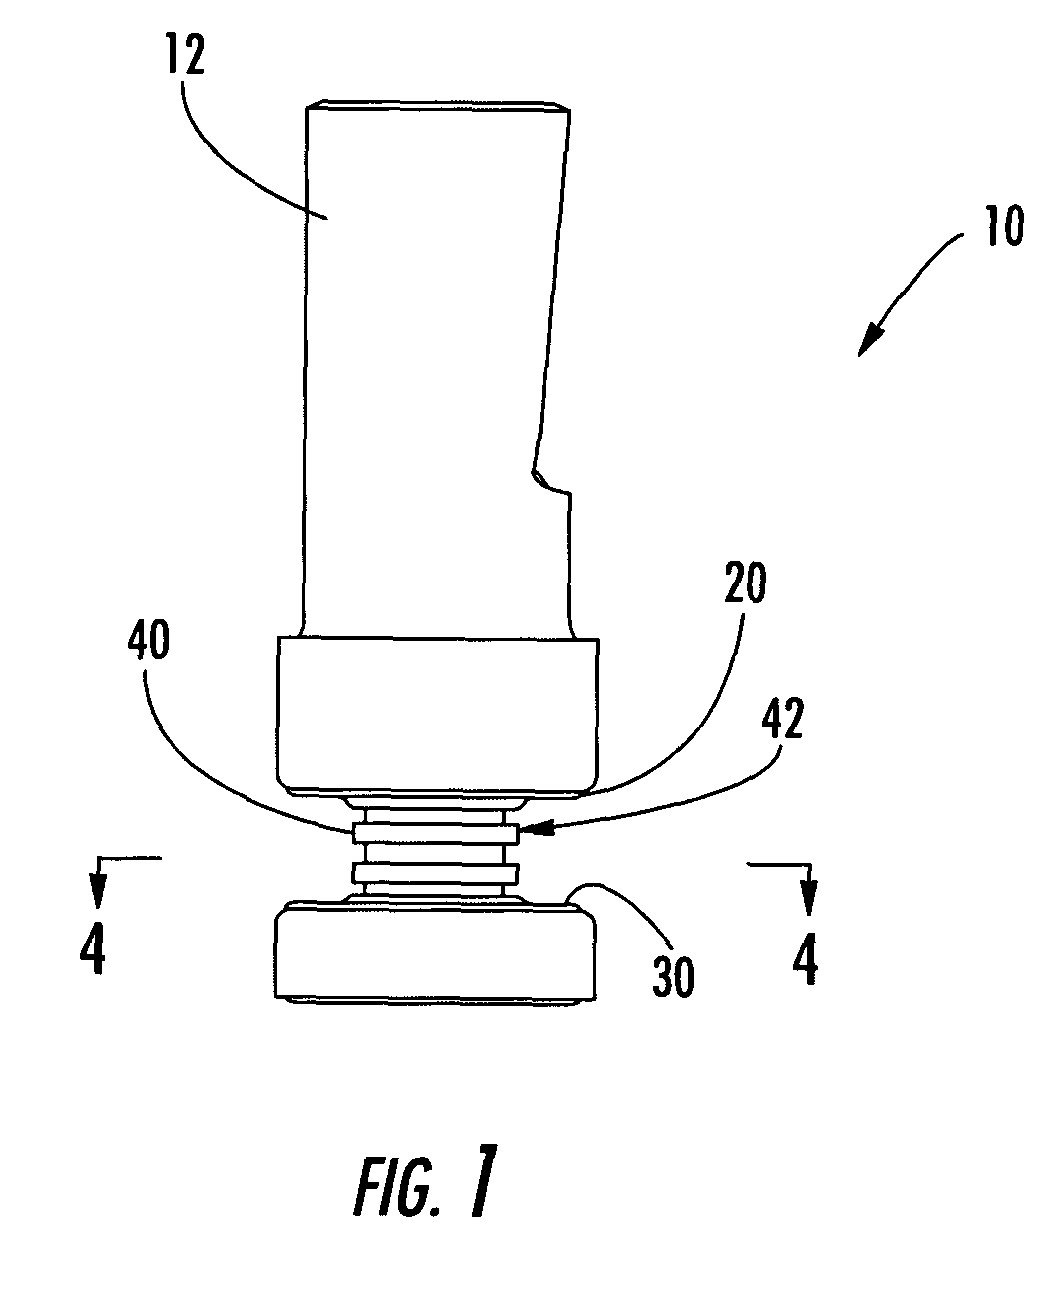 Apparatus and method for friction stir welding utilizing a grooved pin